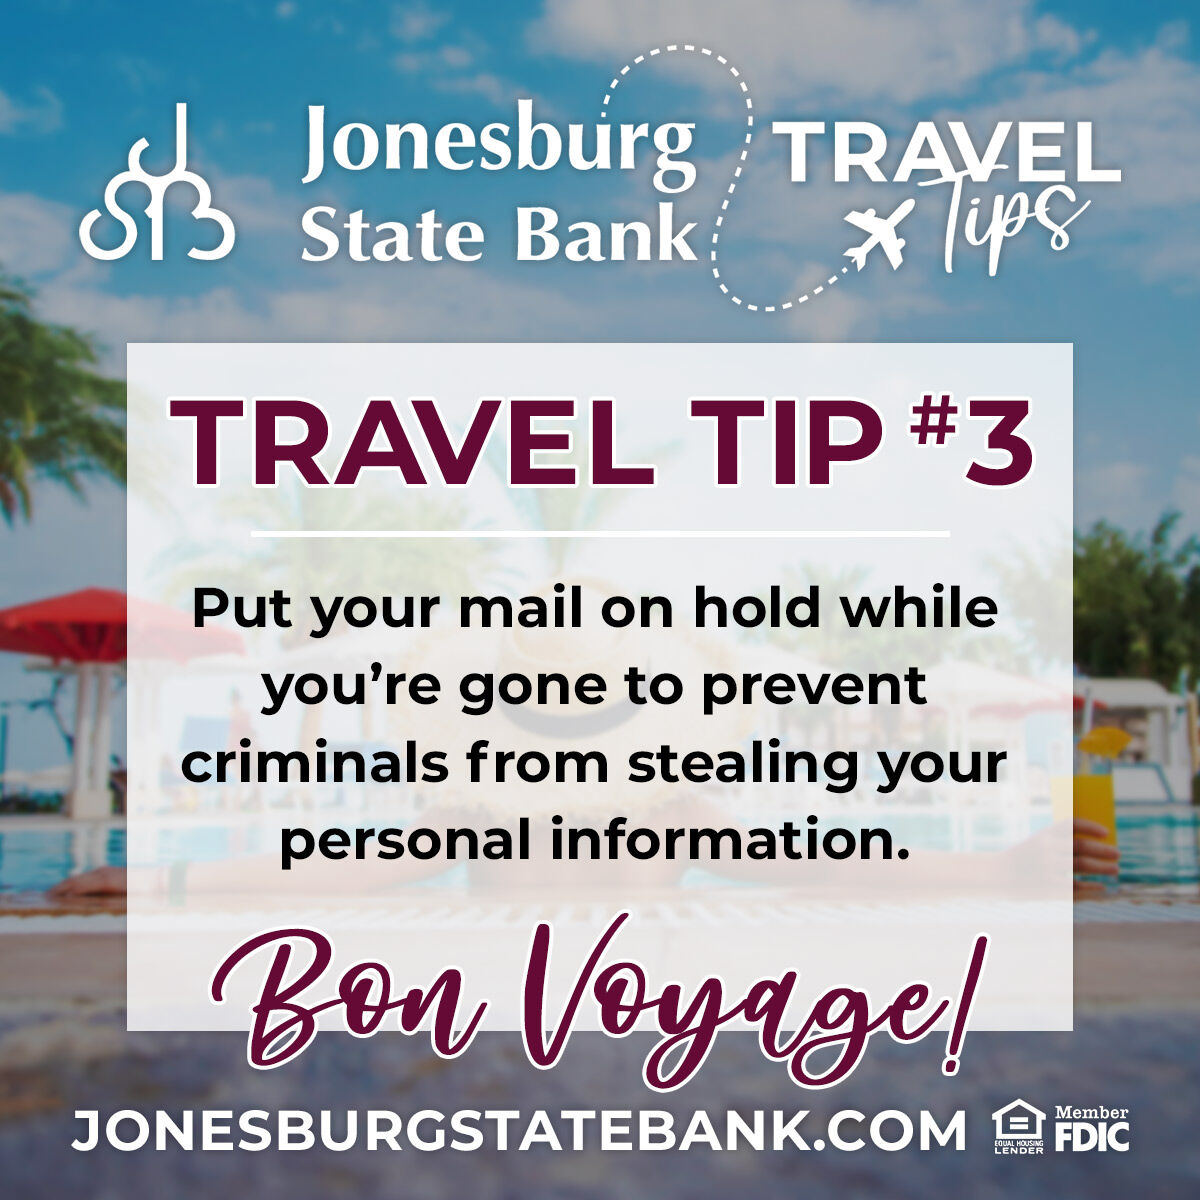 ✉️ Traveling soon? Put your mail on hold! ✉️ 
Safeguard your information by preventing potential theft while you're away. It's a simple step that adds a layer of security to your trip. Enjoy #PeaceOfMind knowing your home & identity are protected. #TravelTip #SecurityFirst 🛡️✈️